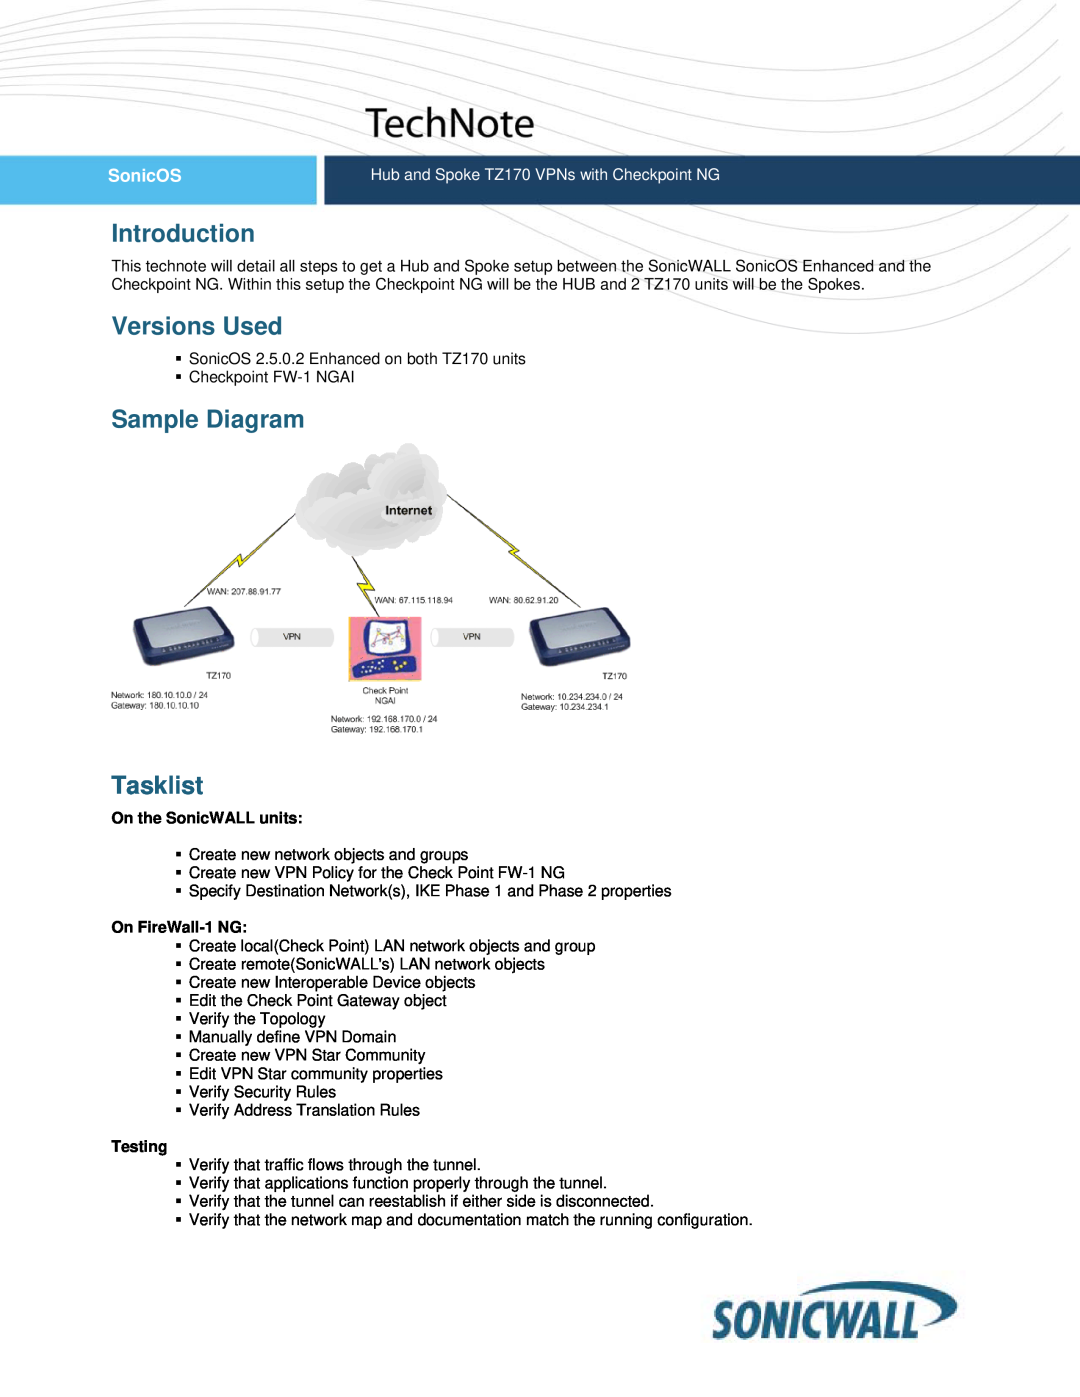 SonicWALL TZ170 manual Introduction, Versions Used, Sample Diagram Tasklist, On the SonicWALL units, On FireWall-1 NG 